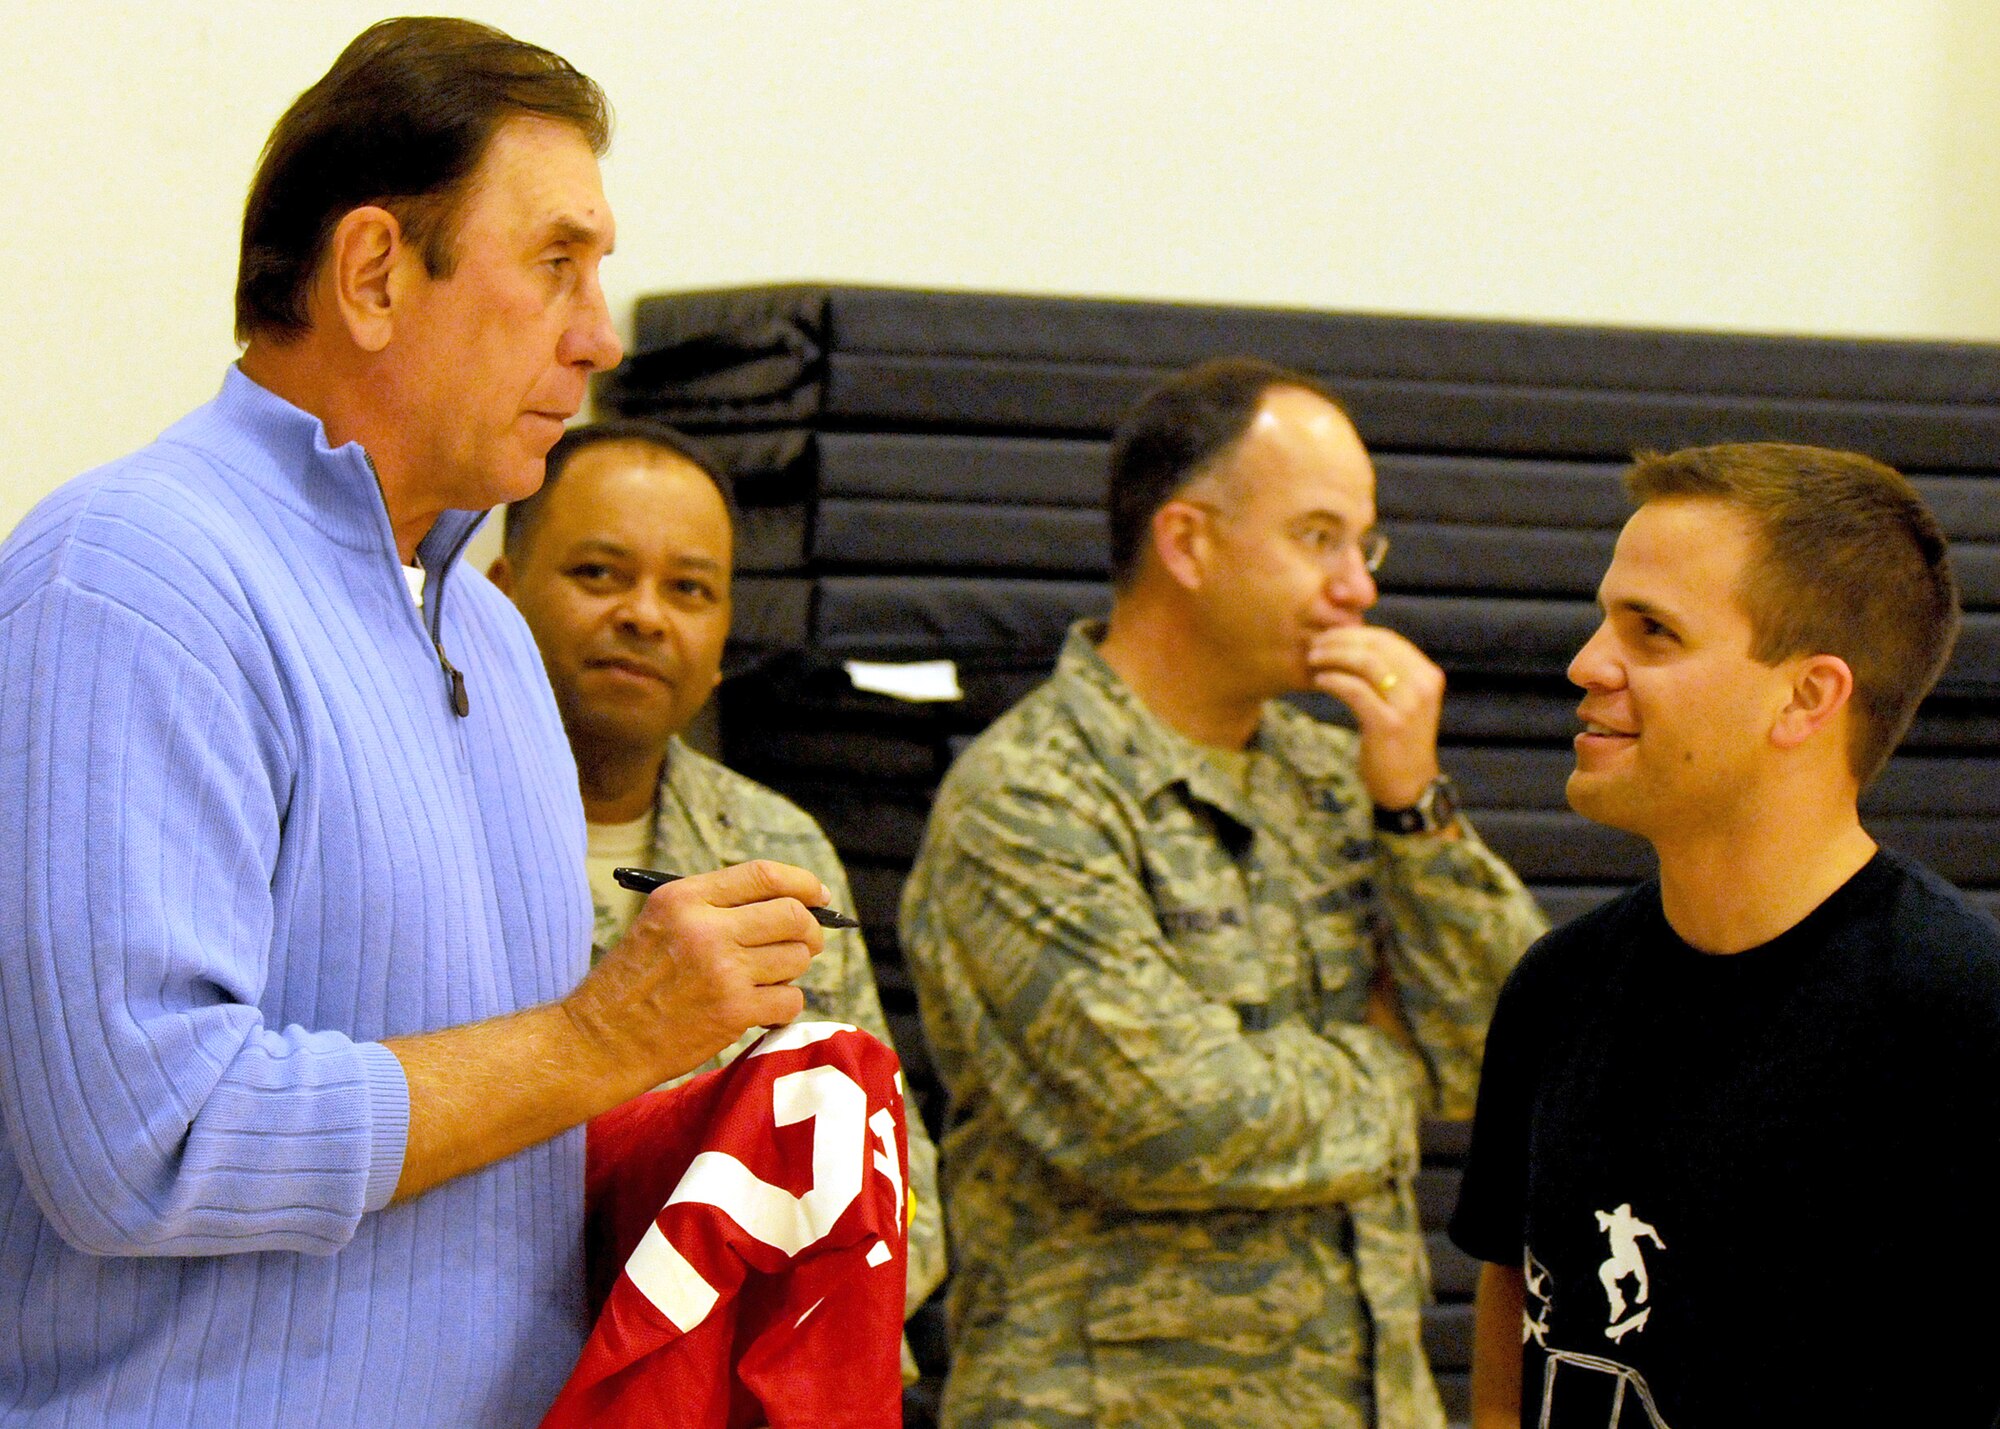 Rudy Tomjanovich (left), former NBA champion, gold medal head coach of the Houston Rockets and the Men’s Basketball team for the 2000 Olympics, and former head coach of the Los Angeles Lakers, autographs a Houston Rockets jersey for 1st Lt. Erik Torguson, Military Satellite Communications Systems Wing, before the intramural basketball game for the MILSATCOM Wing team, Feb. 12. Brig. Gen. Samuel Greaves (back, left), MILSATCOM Wing commander, and Col. Arnold Streland, MILSATCOM Wing TSAT Space Group commander, look on. Coach Tomjanovich visited the Space and Missile Center to support the troops as an invitation from his personal friend, Tom Meseroll, MILSATCOM Chief Engineer’s Office senior contractor. He stayed to watch team MCSW play its Intramural Basketball league game at the base gymnasium. (Photo by Stephen Schester) (released)